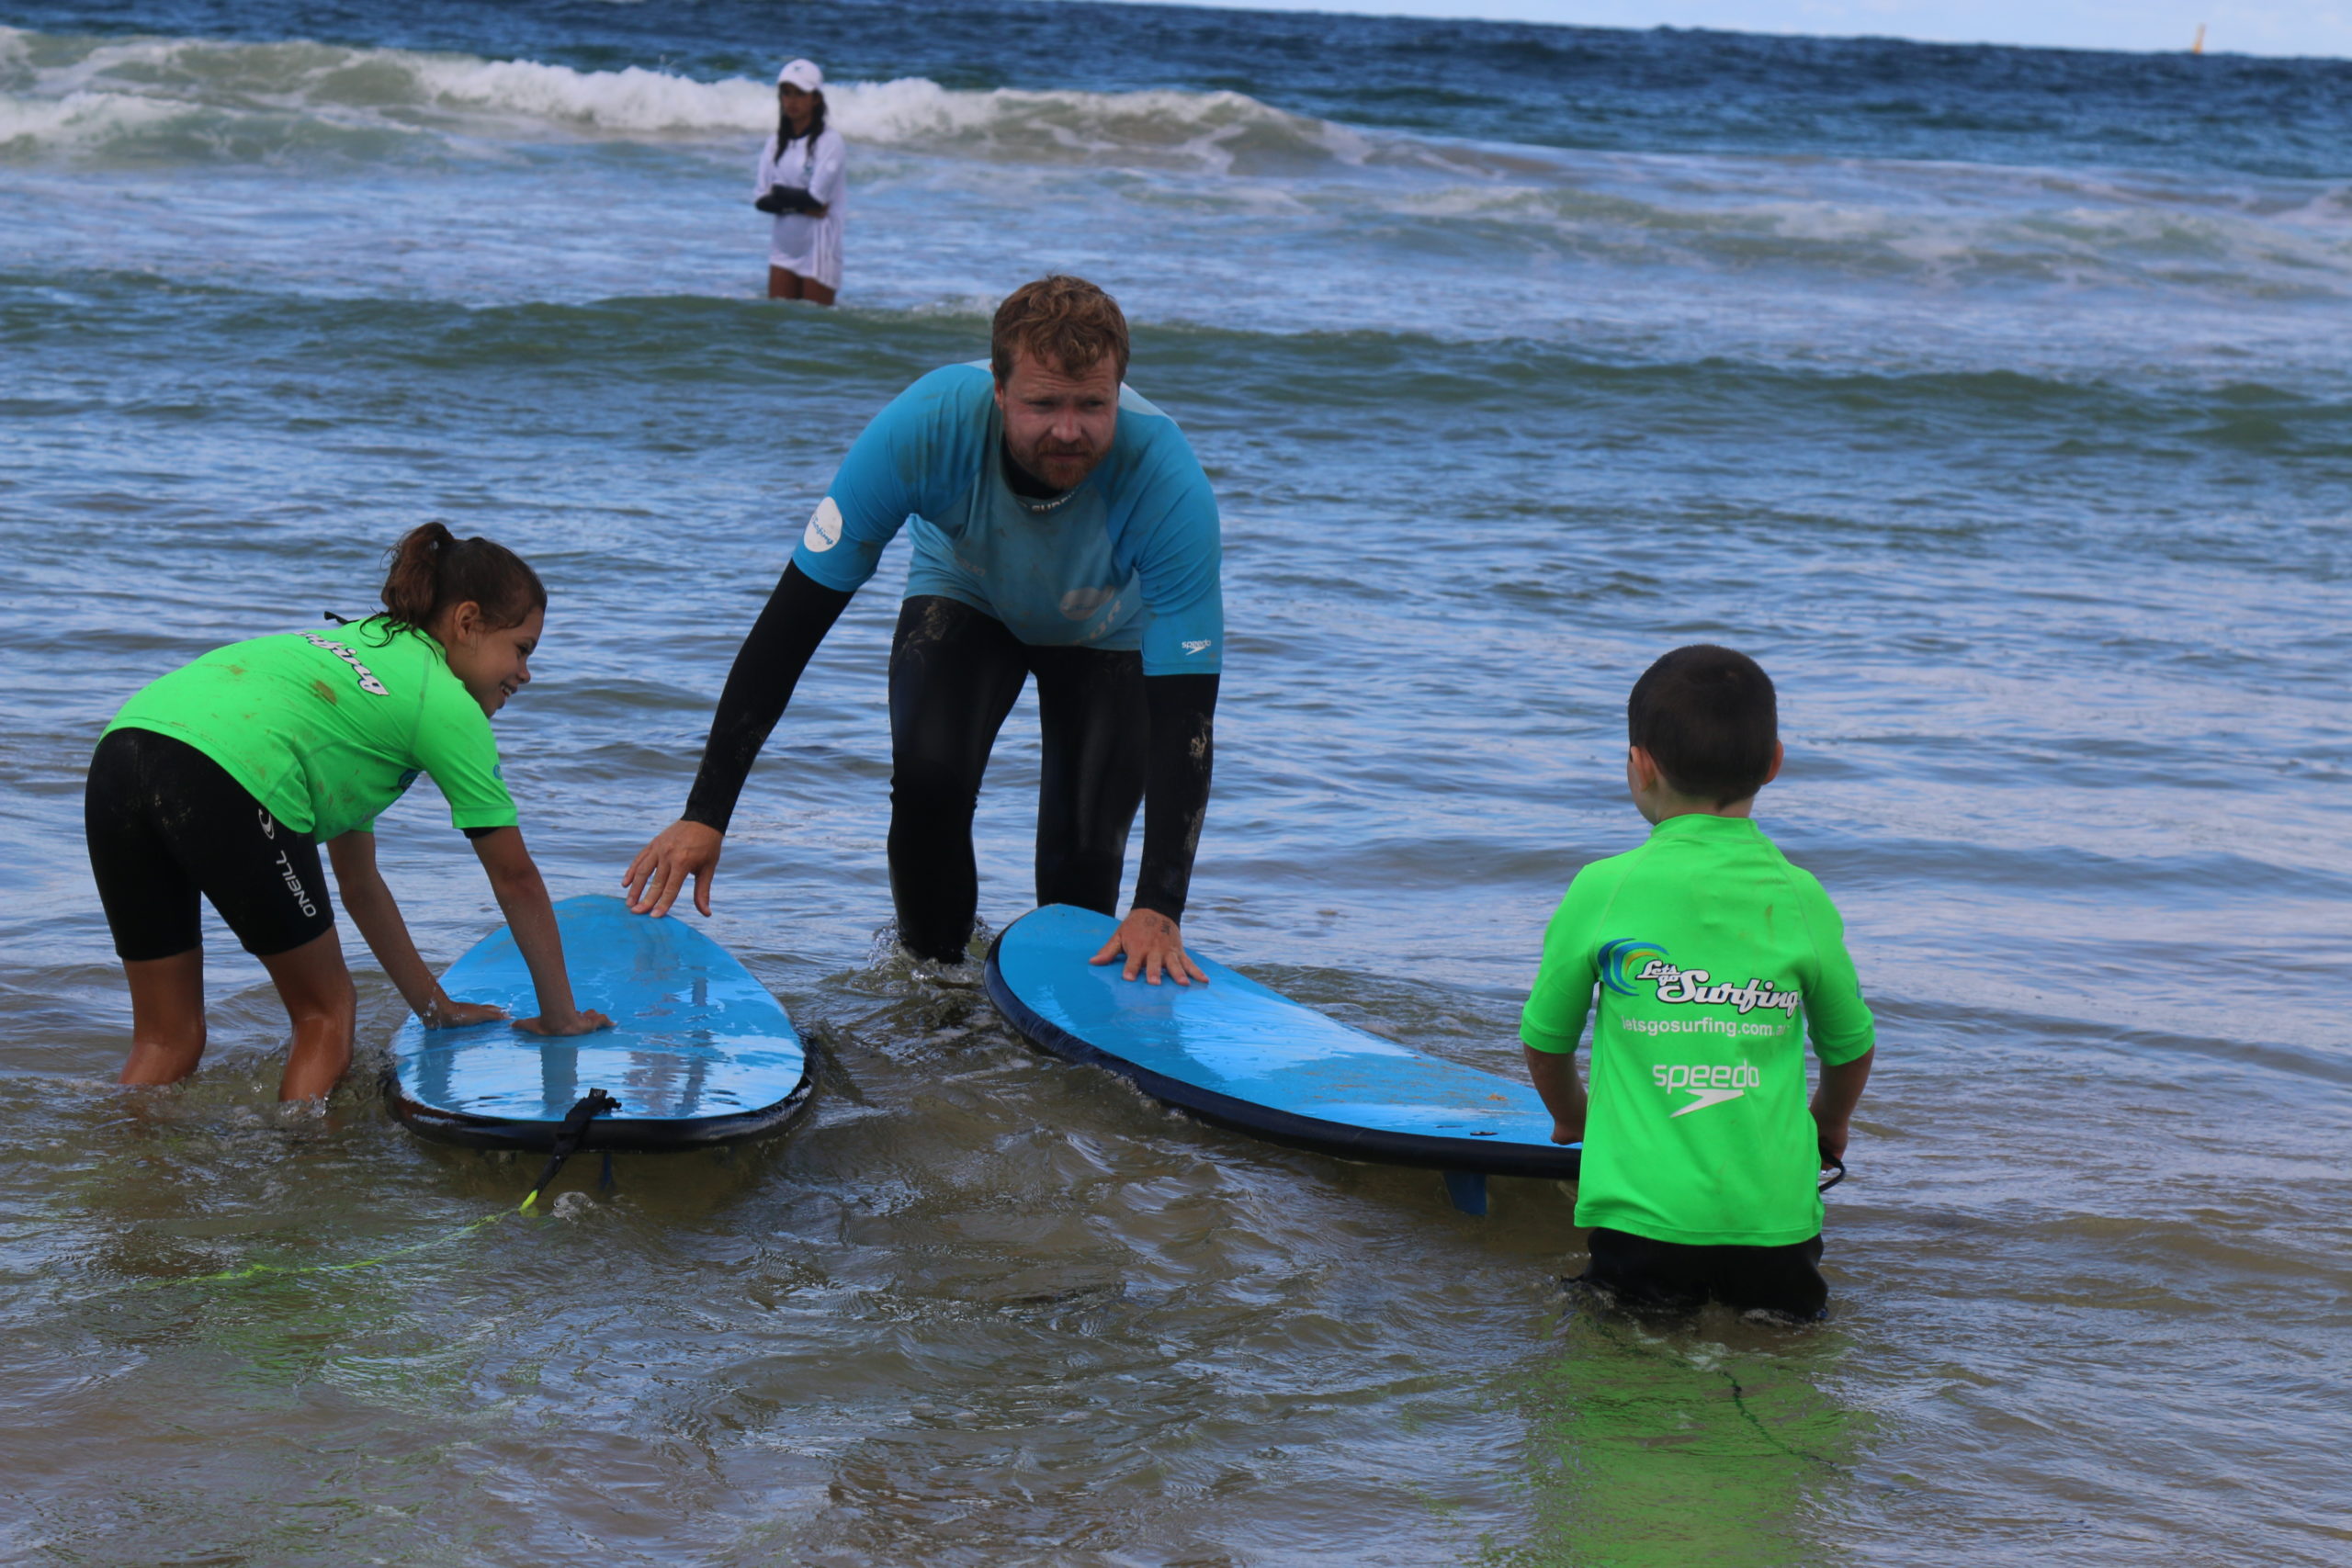 Women & Children's Centre Surf Day - Weave Youth & Community Services